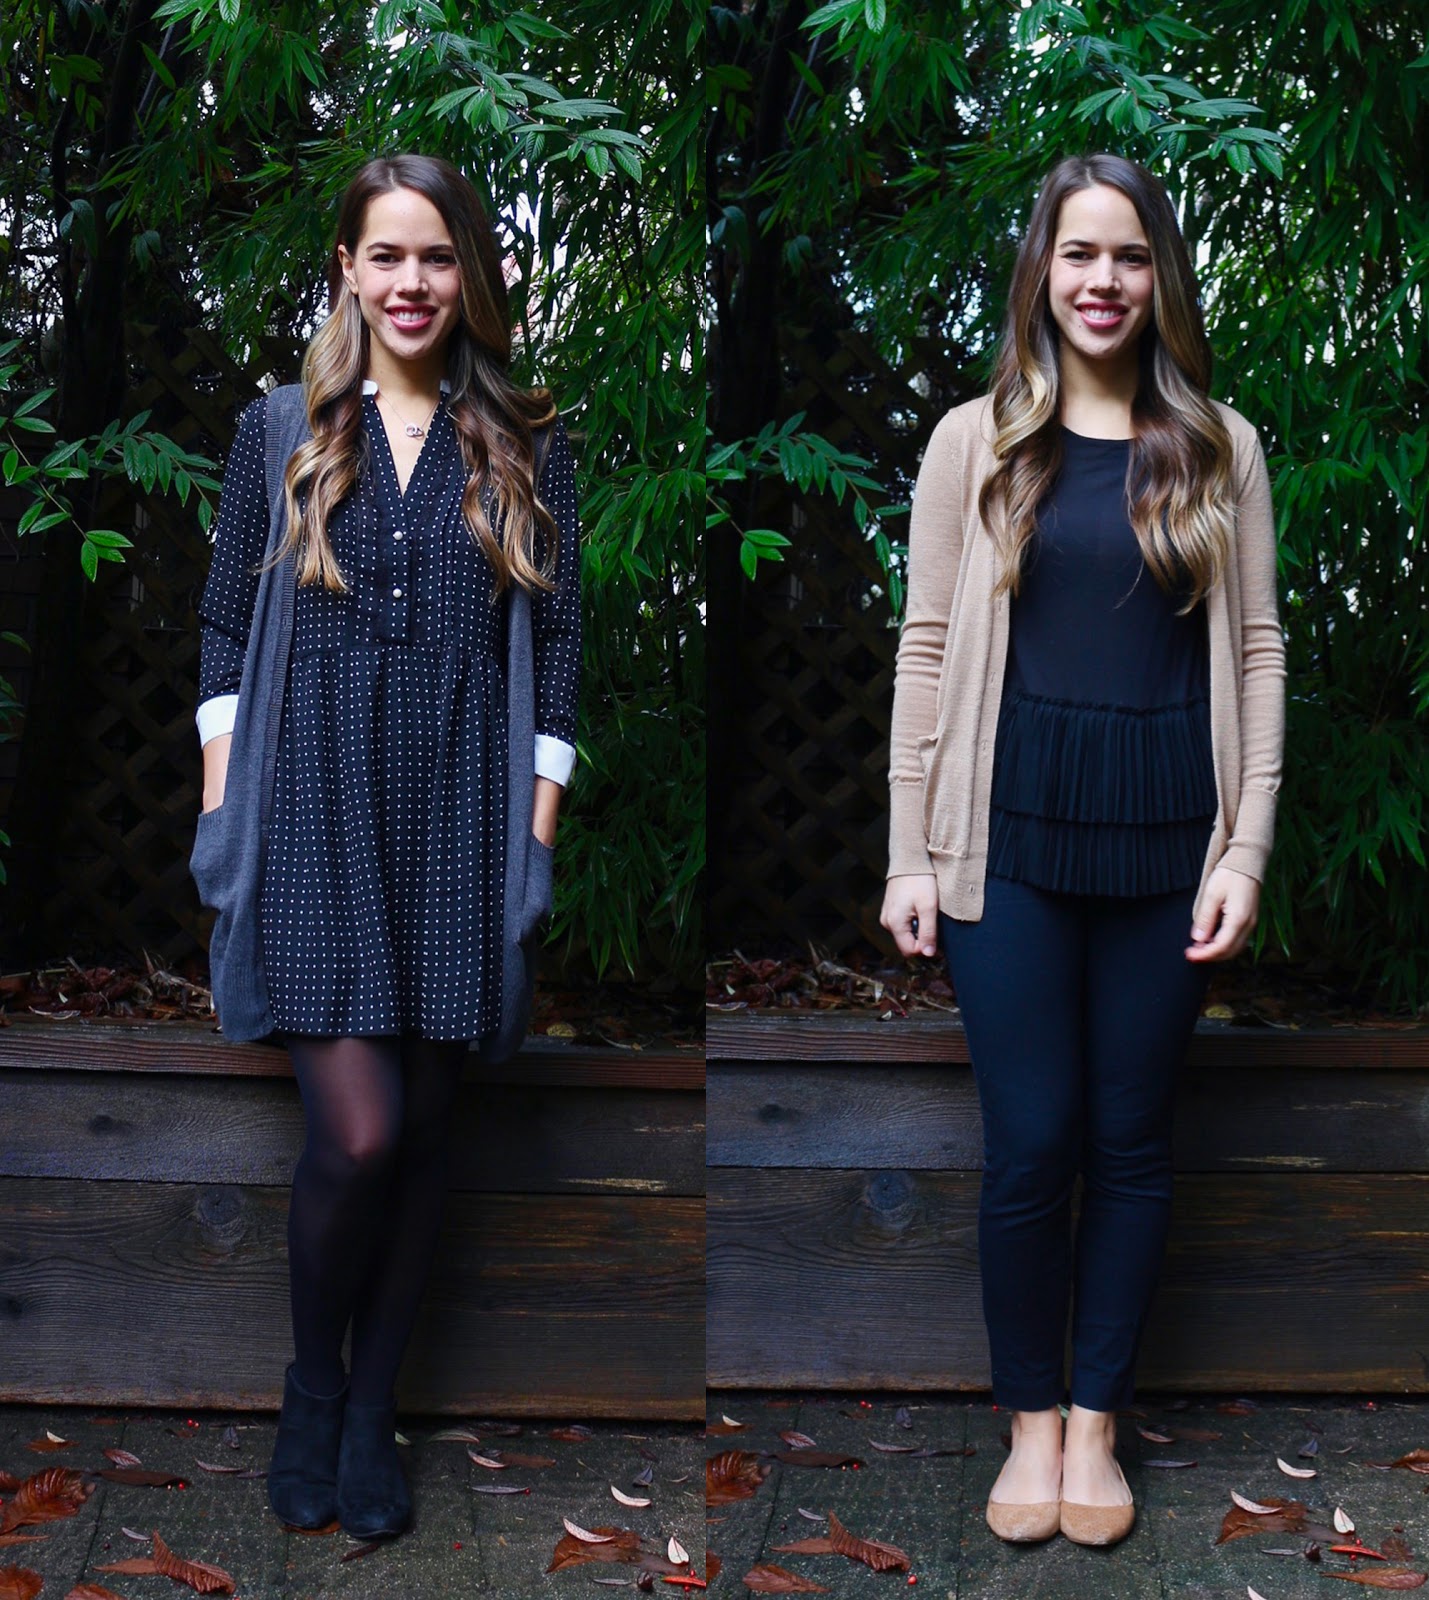 Jules in Flats - November Outfits (Business Casual Fall Workwear on a Budget)